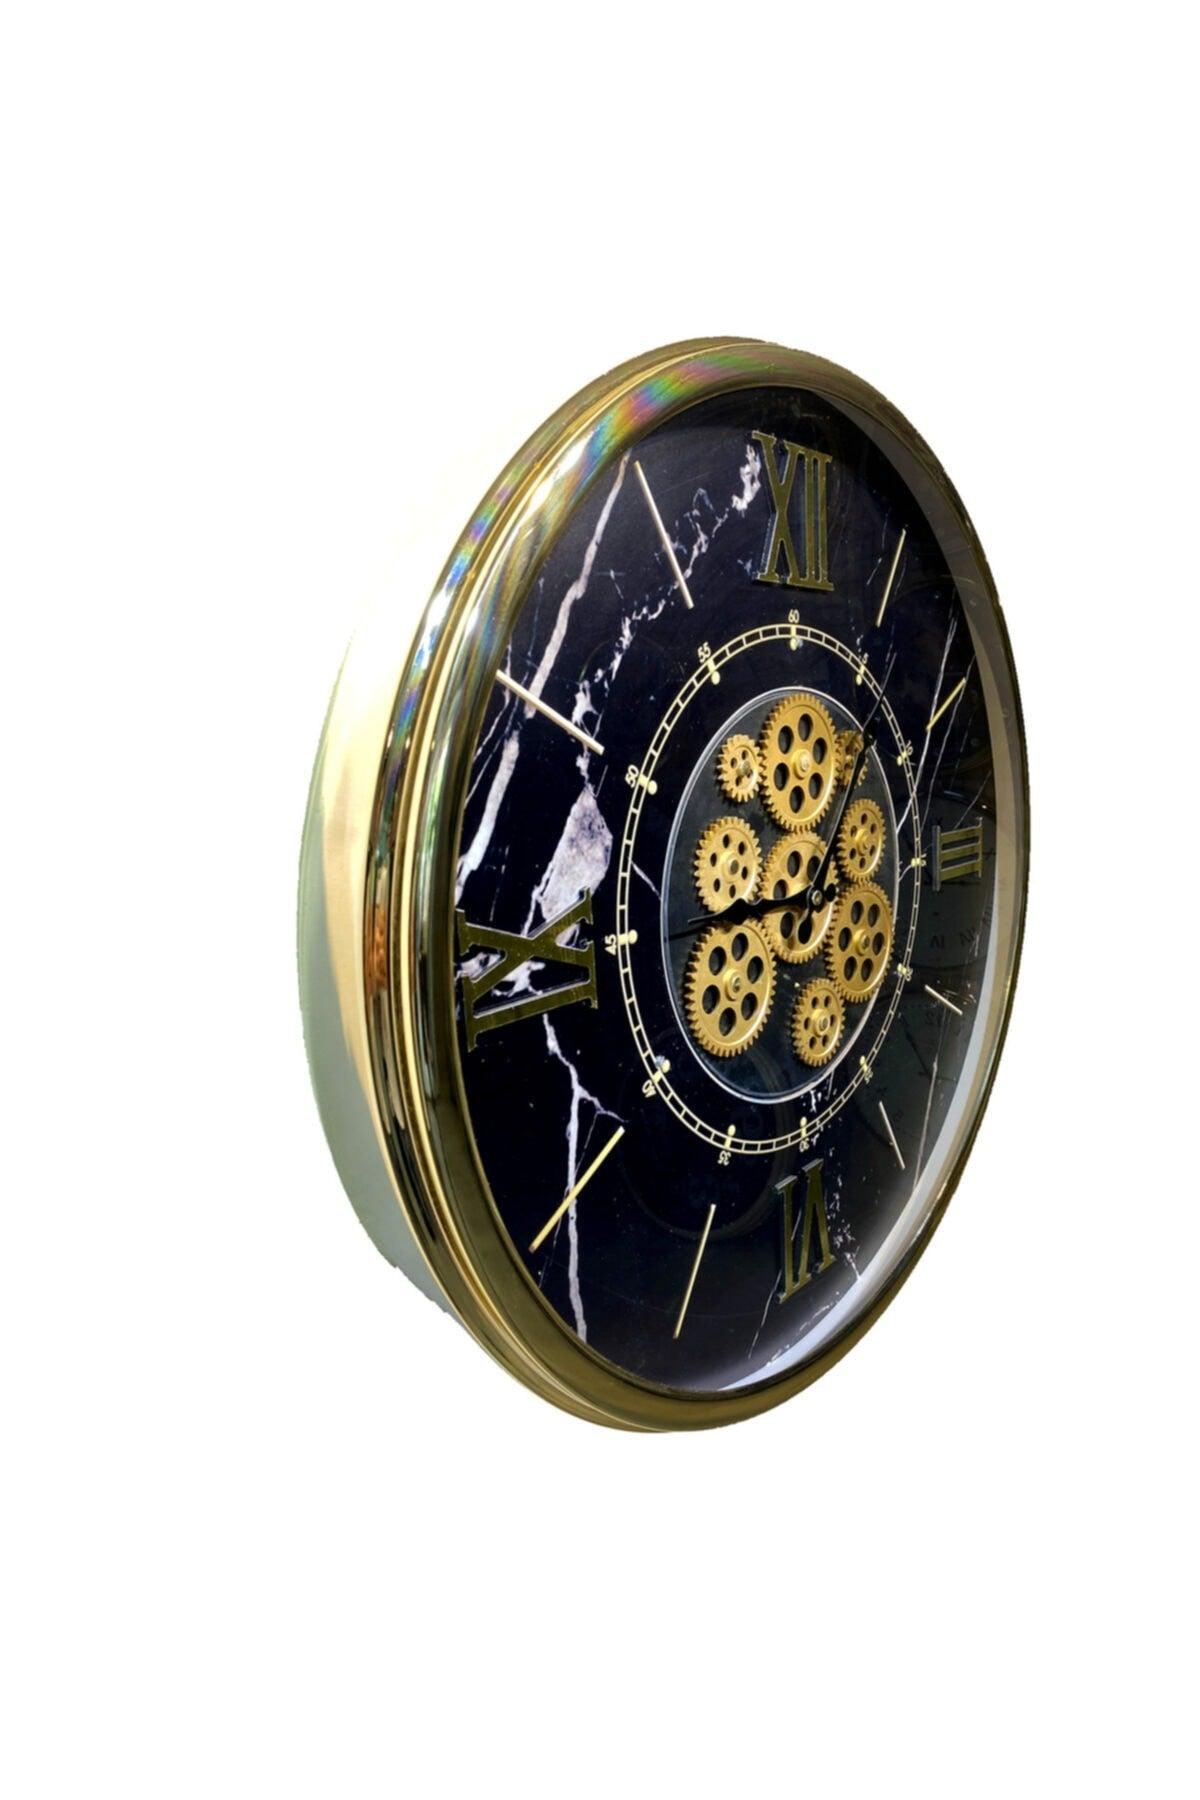 Metal Gold Plated Glass Wall Clock with Active Wheel - Swordslife